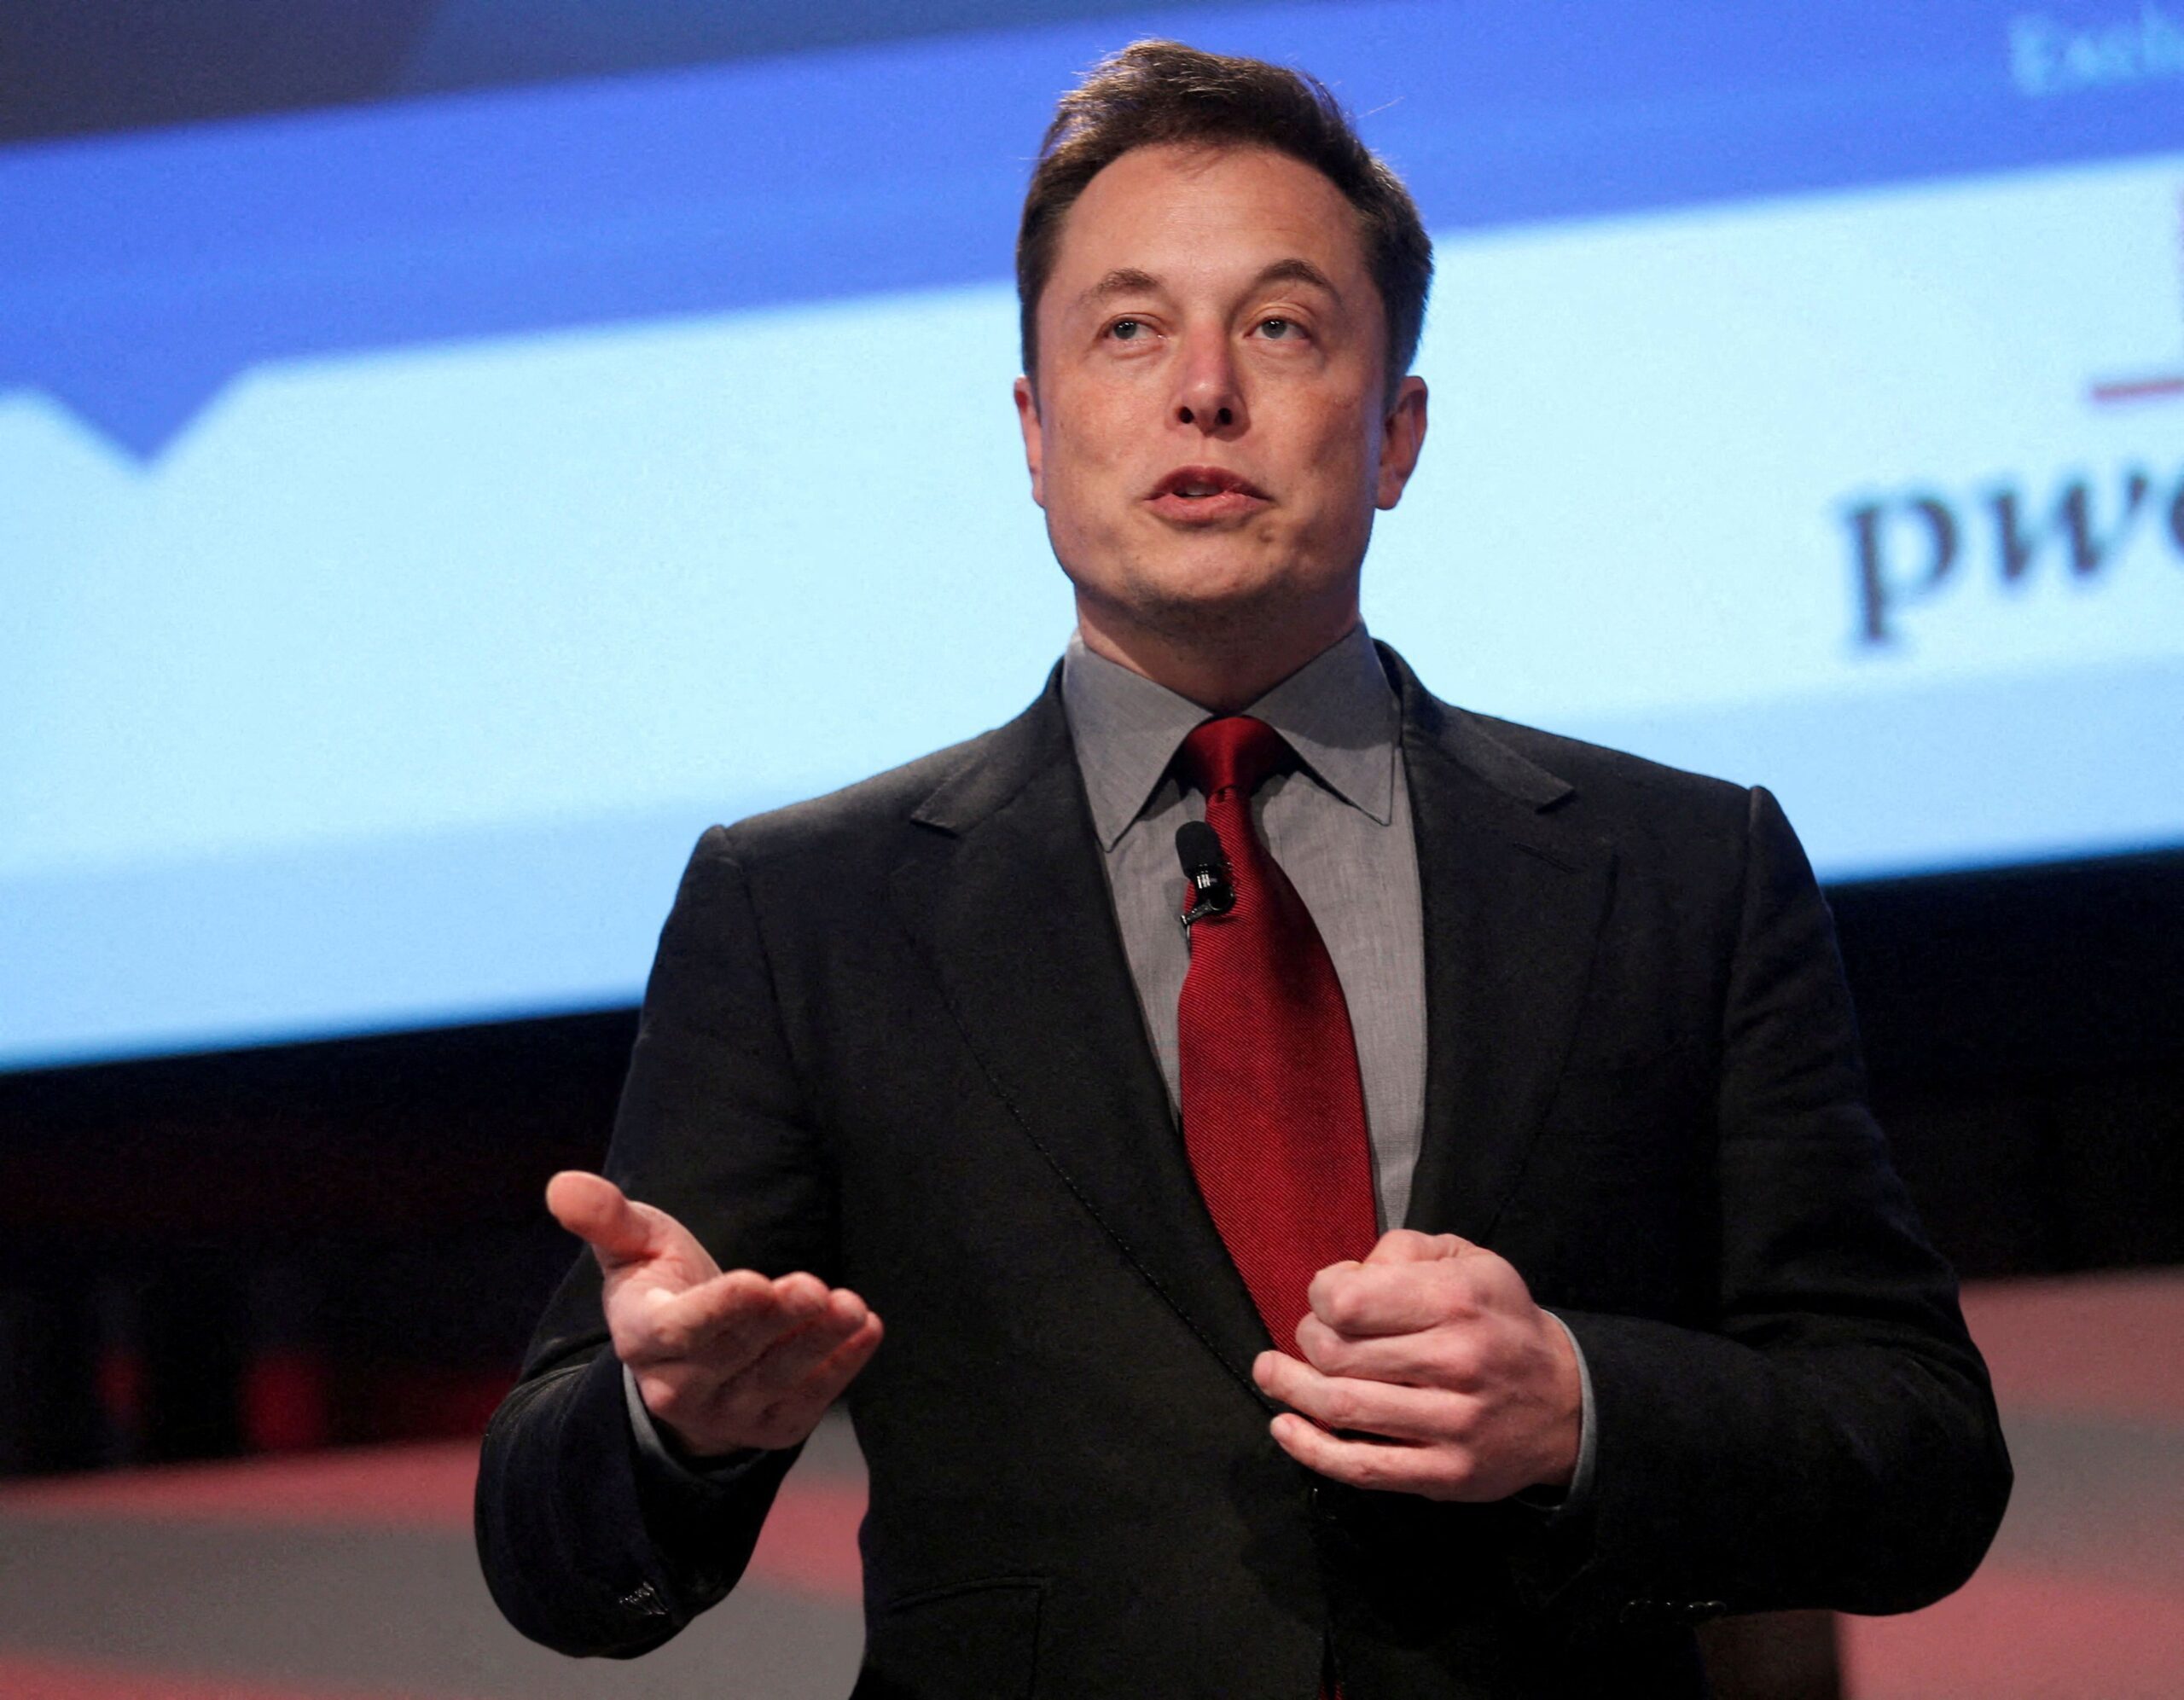 Elon Musk to address Twitter employees for first time in Town Hall